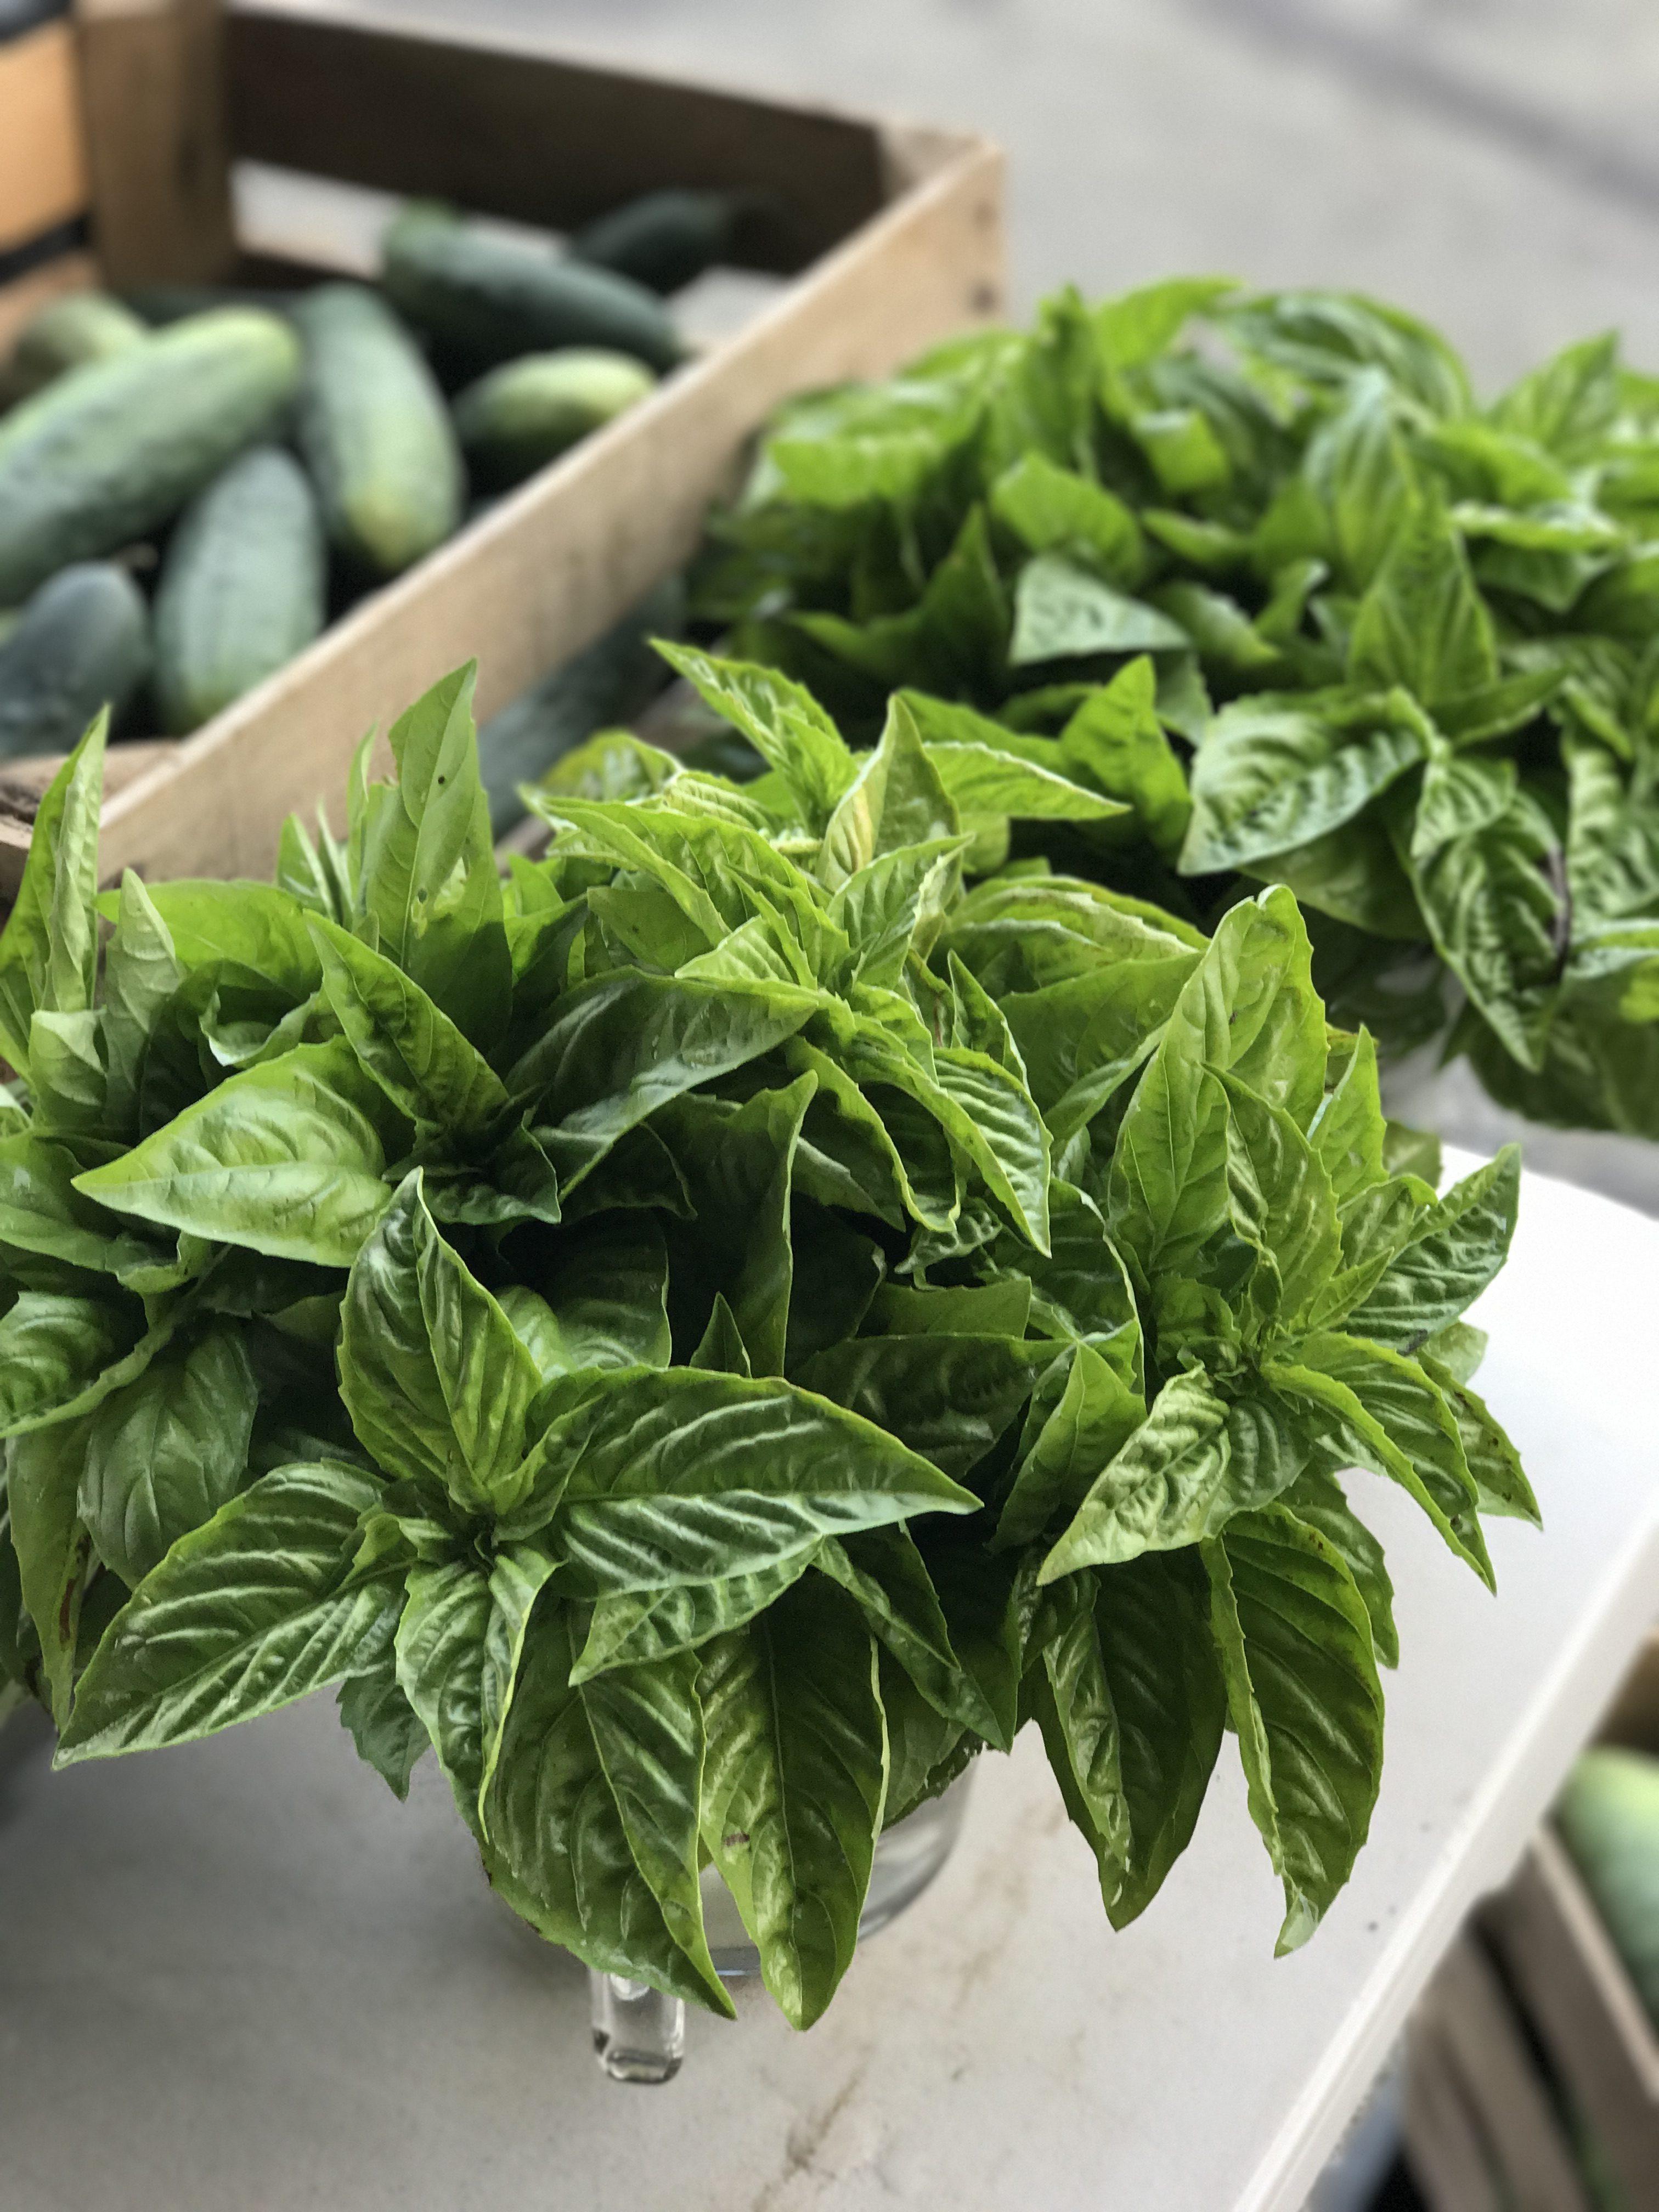 Bunches of basil at the farmer's market